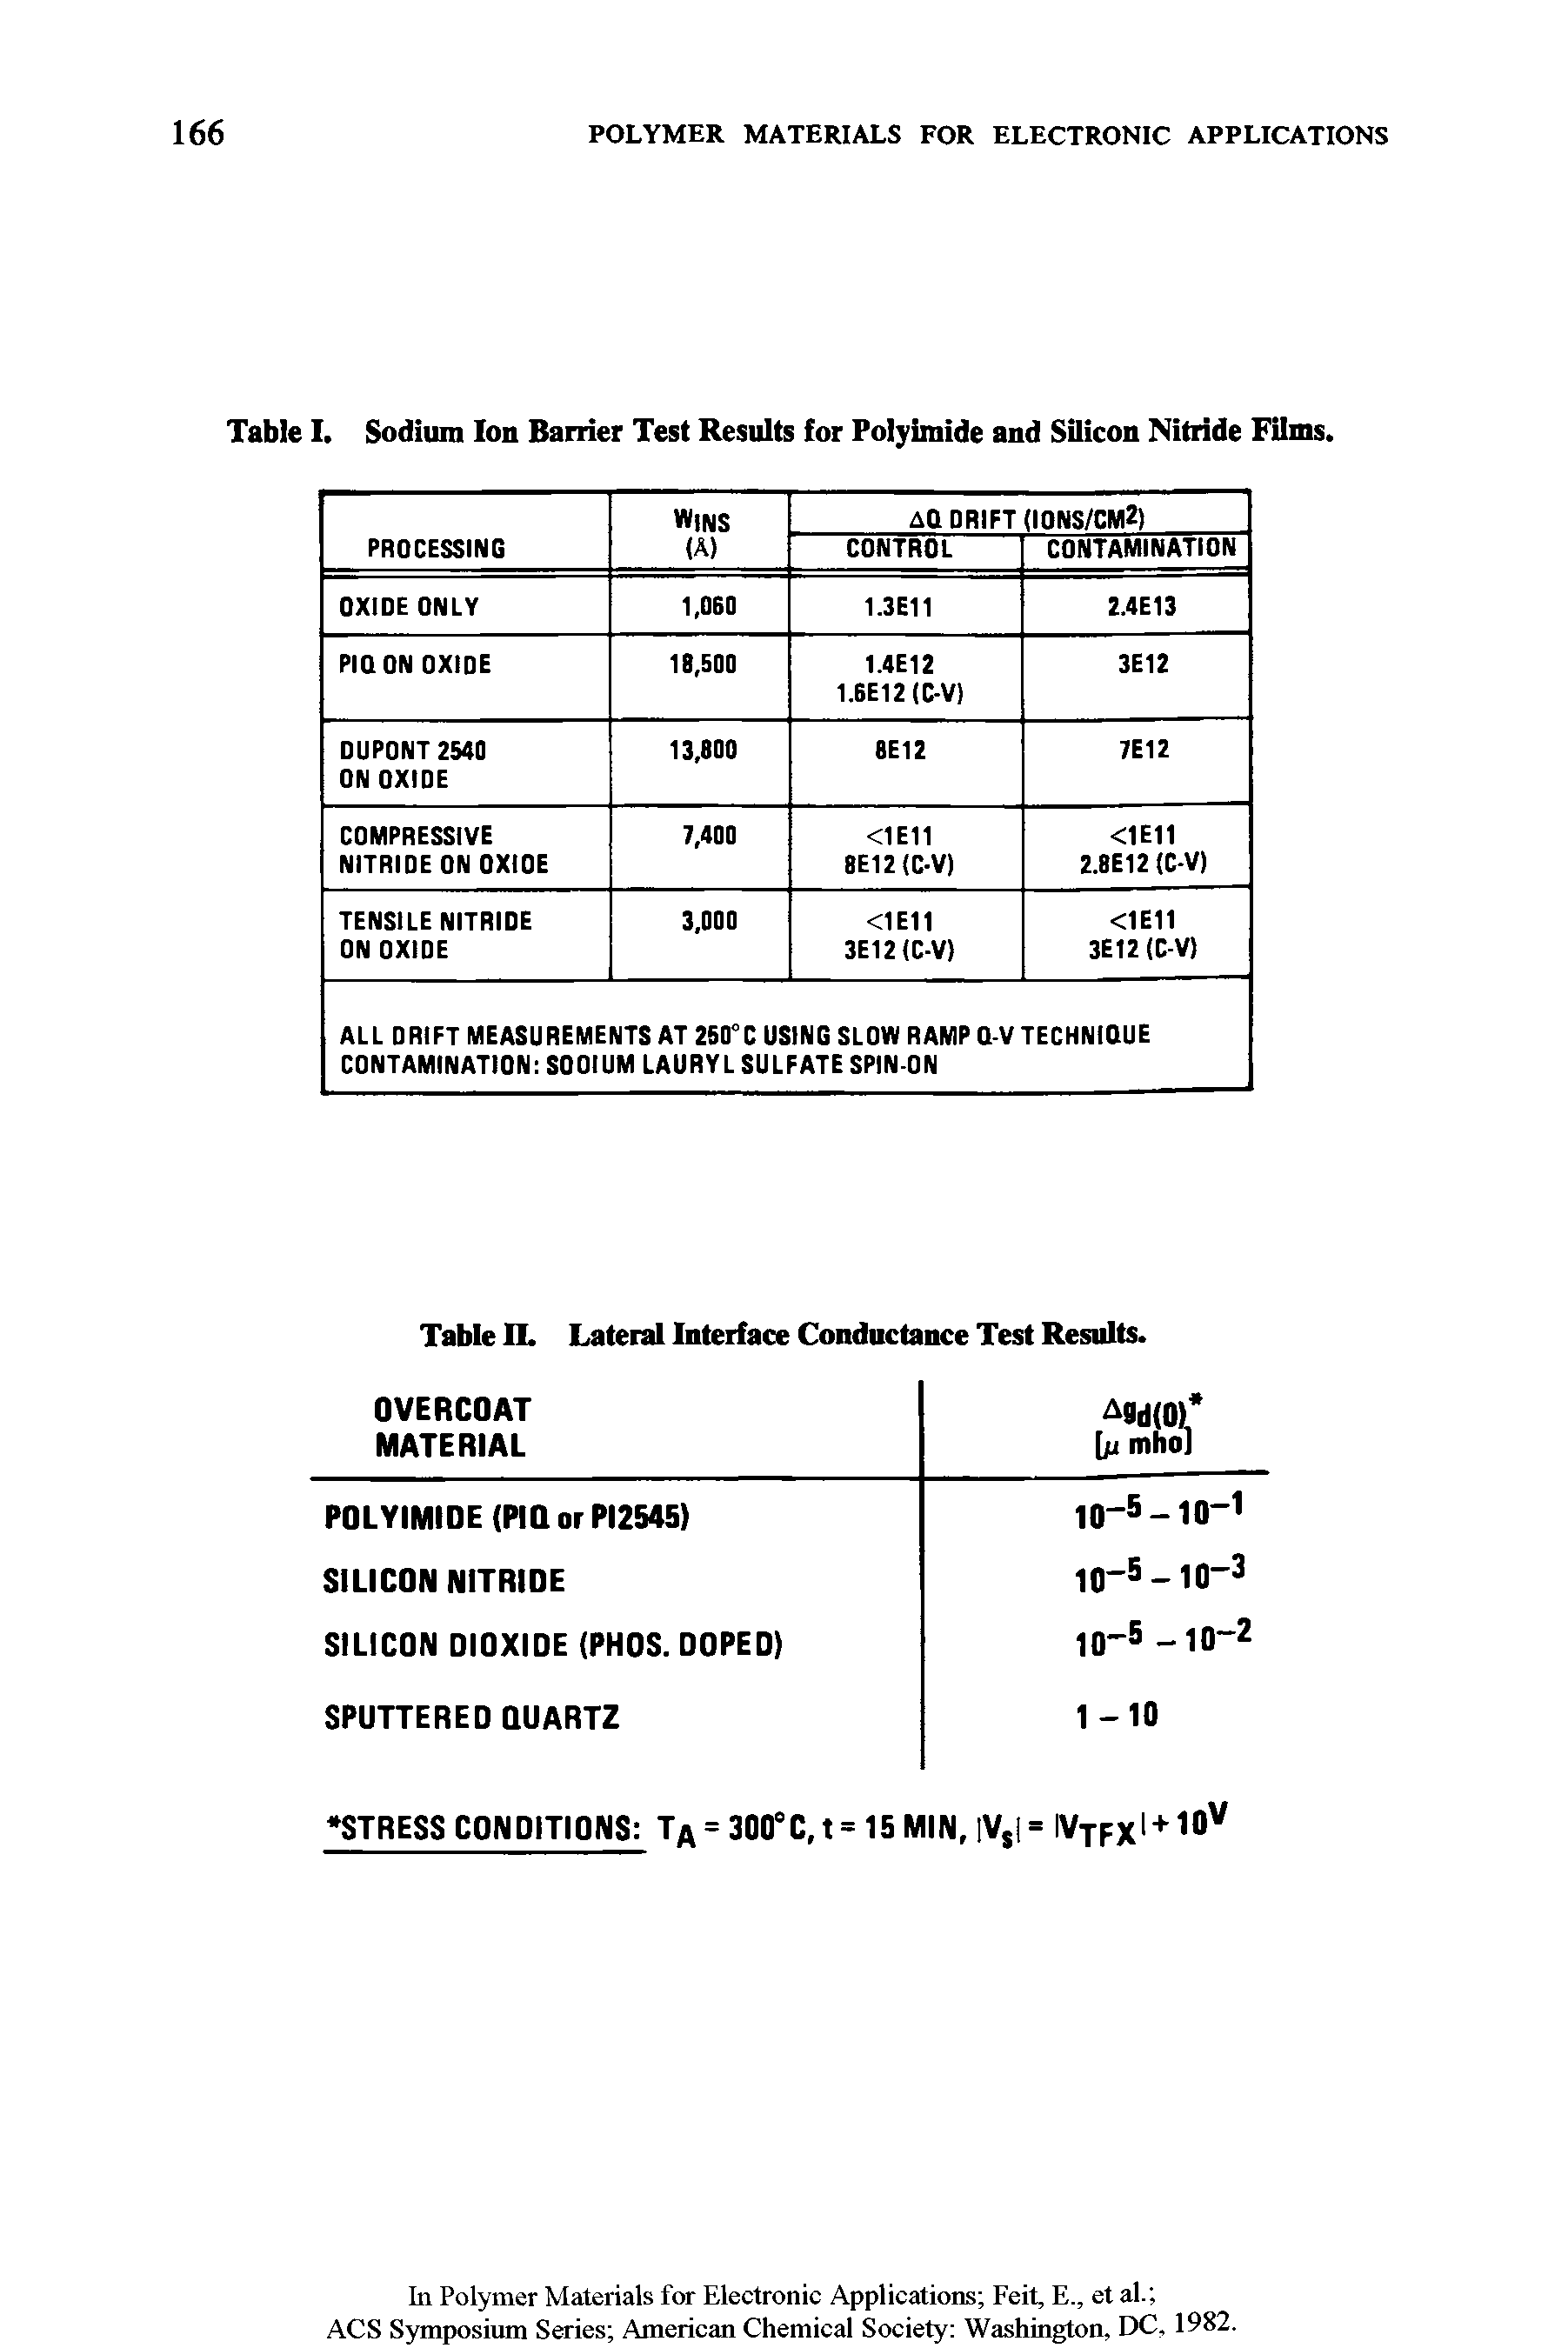 Table I. Sodium Ion Barrier Test Results for Polyimide and Silicon Nitride Films.